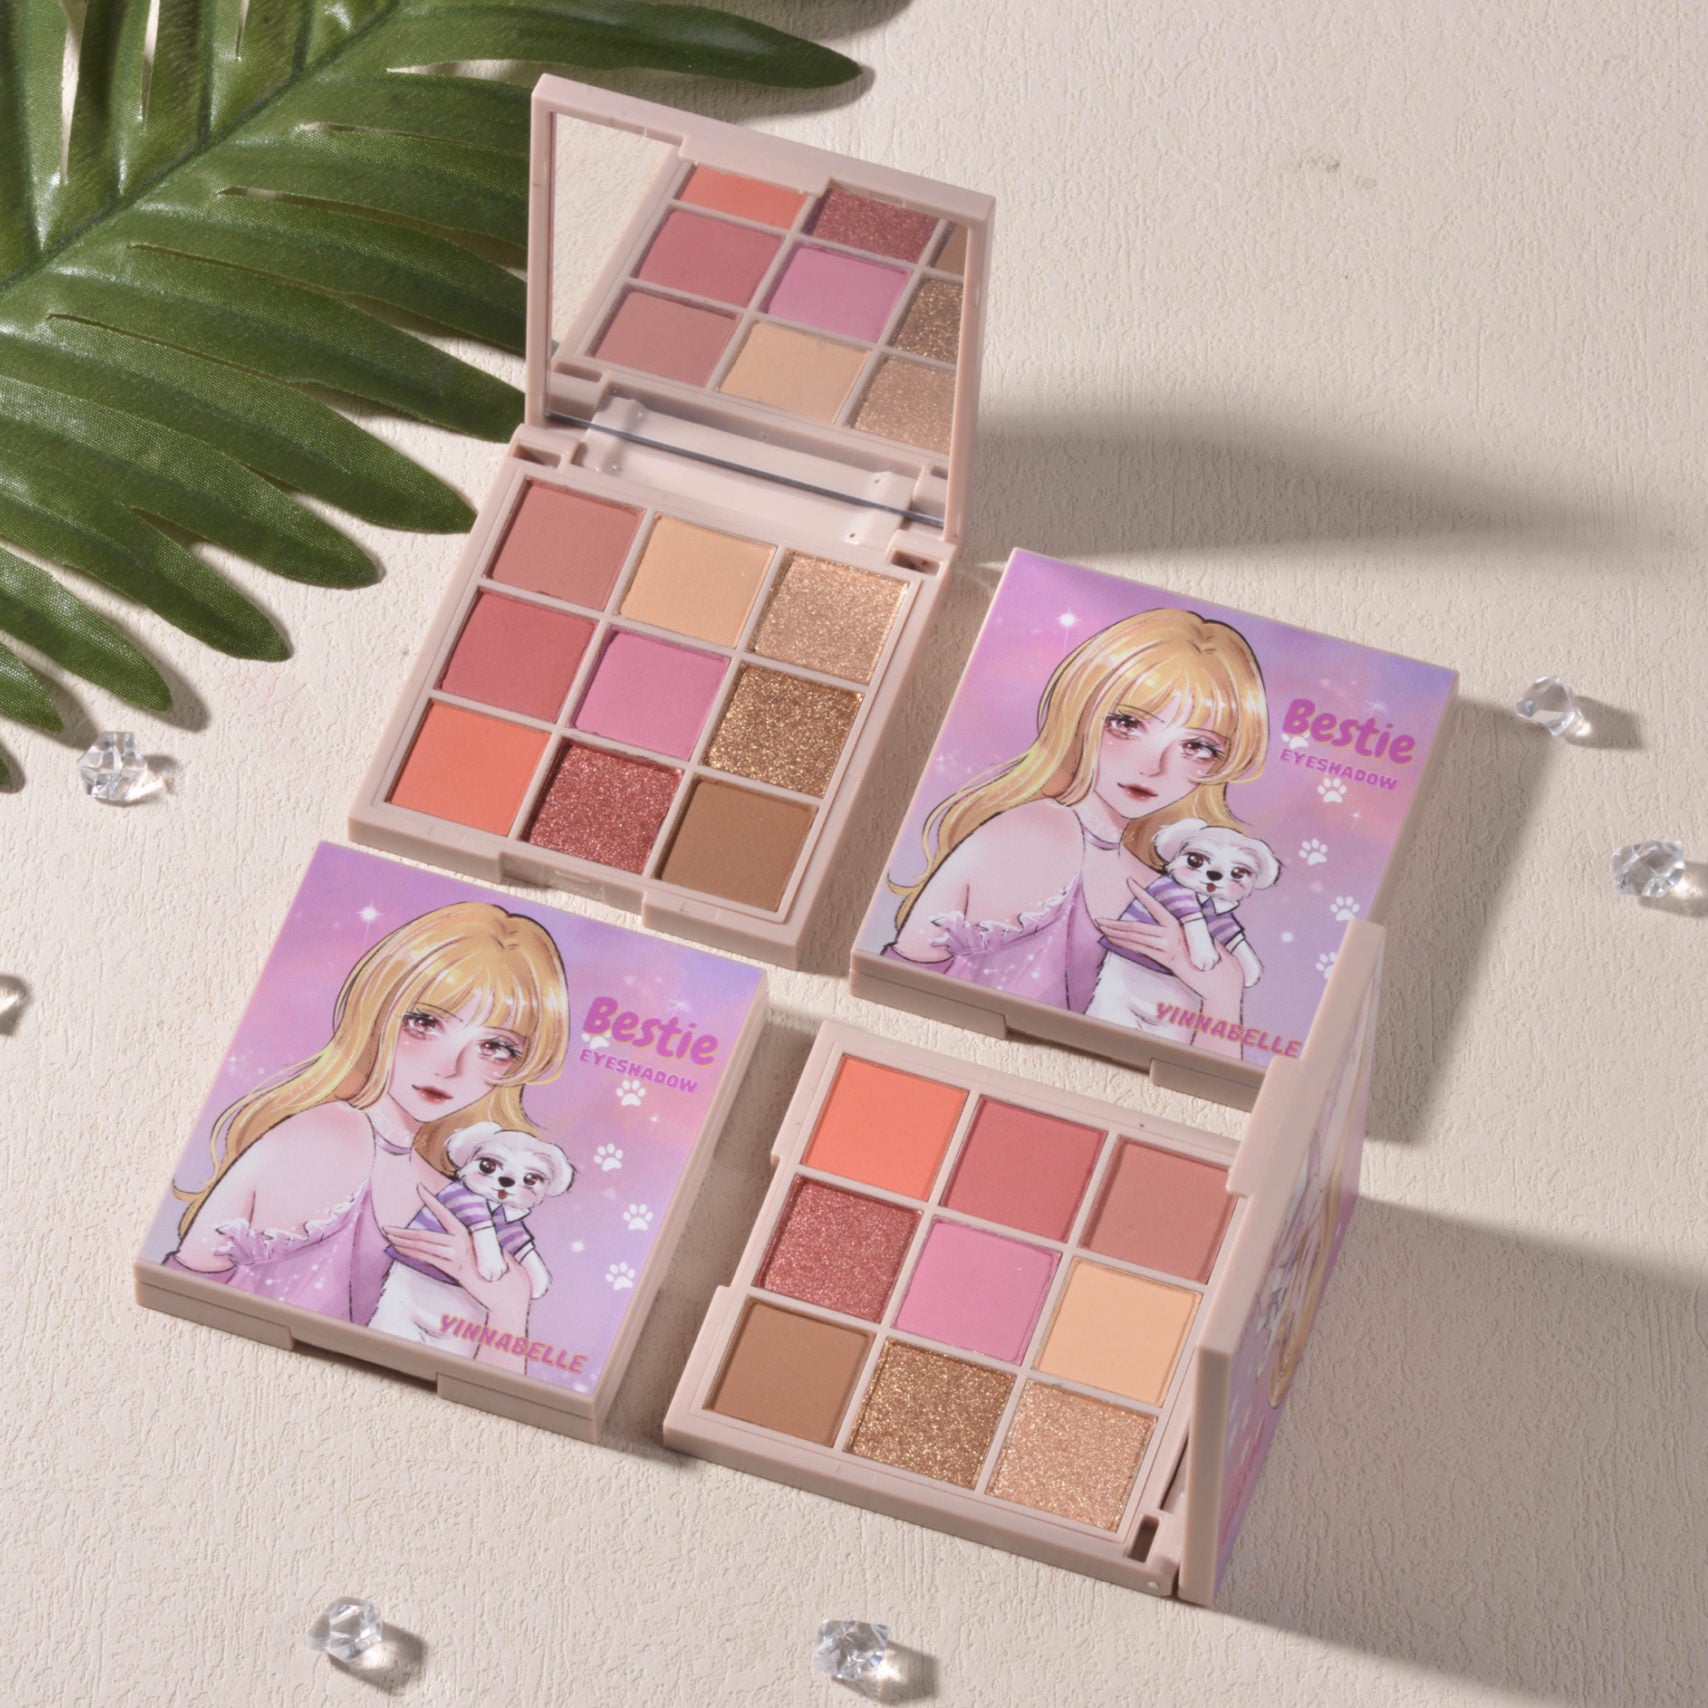 Buy Rude Cosmetics Manga Anime 35 Eyeshadow Palette Online at Low Prices in  India  Amazonin